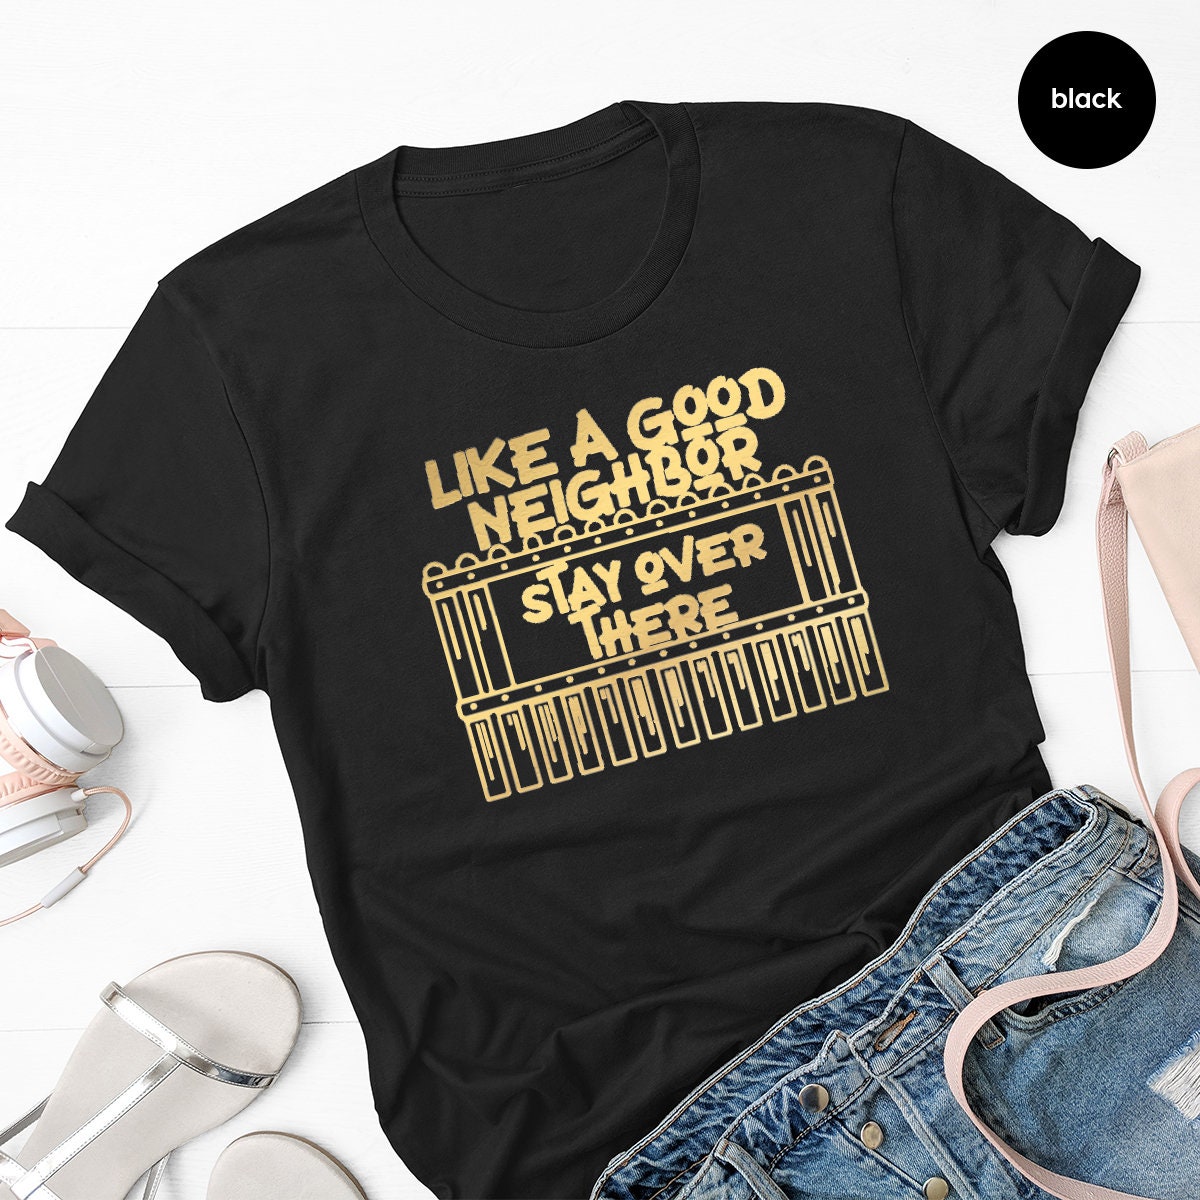 Funny Unsocials  T Shirt, Like A Good Neighbor Stay Over There Shirt, Stay Home T Shirt, Quarantine  T Shirt, Introvert T Shirt - Fastdeliverytees.com